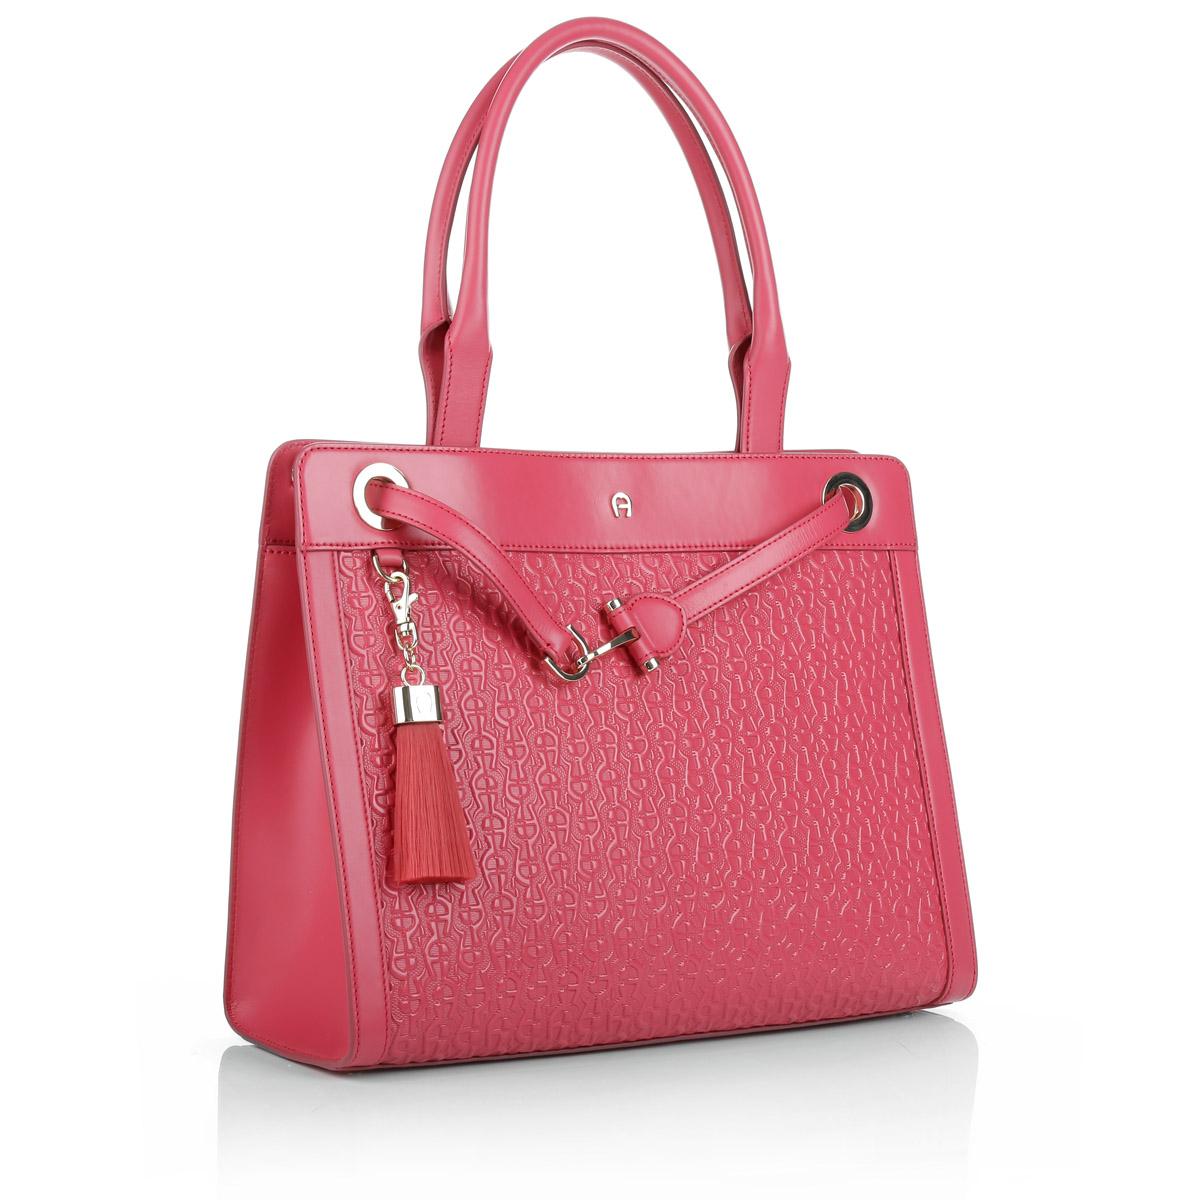 Stunning top handle hand bag & wallet set by Aigner
Consisting of a handbag with shoulder strap, charms and a matching zip wallet

Top handle bag with shoulder strap
Made of finest pink leather with embossed logo emblem front and back
   Two